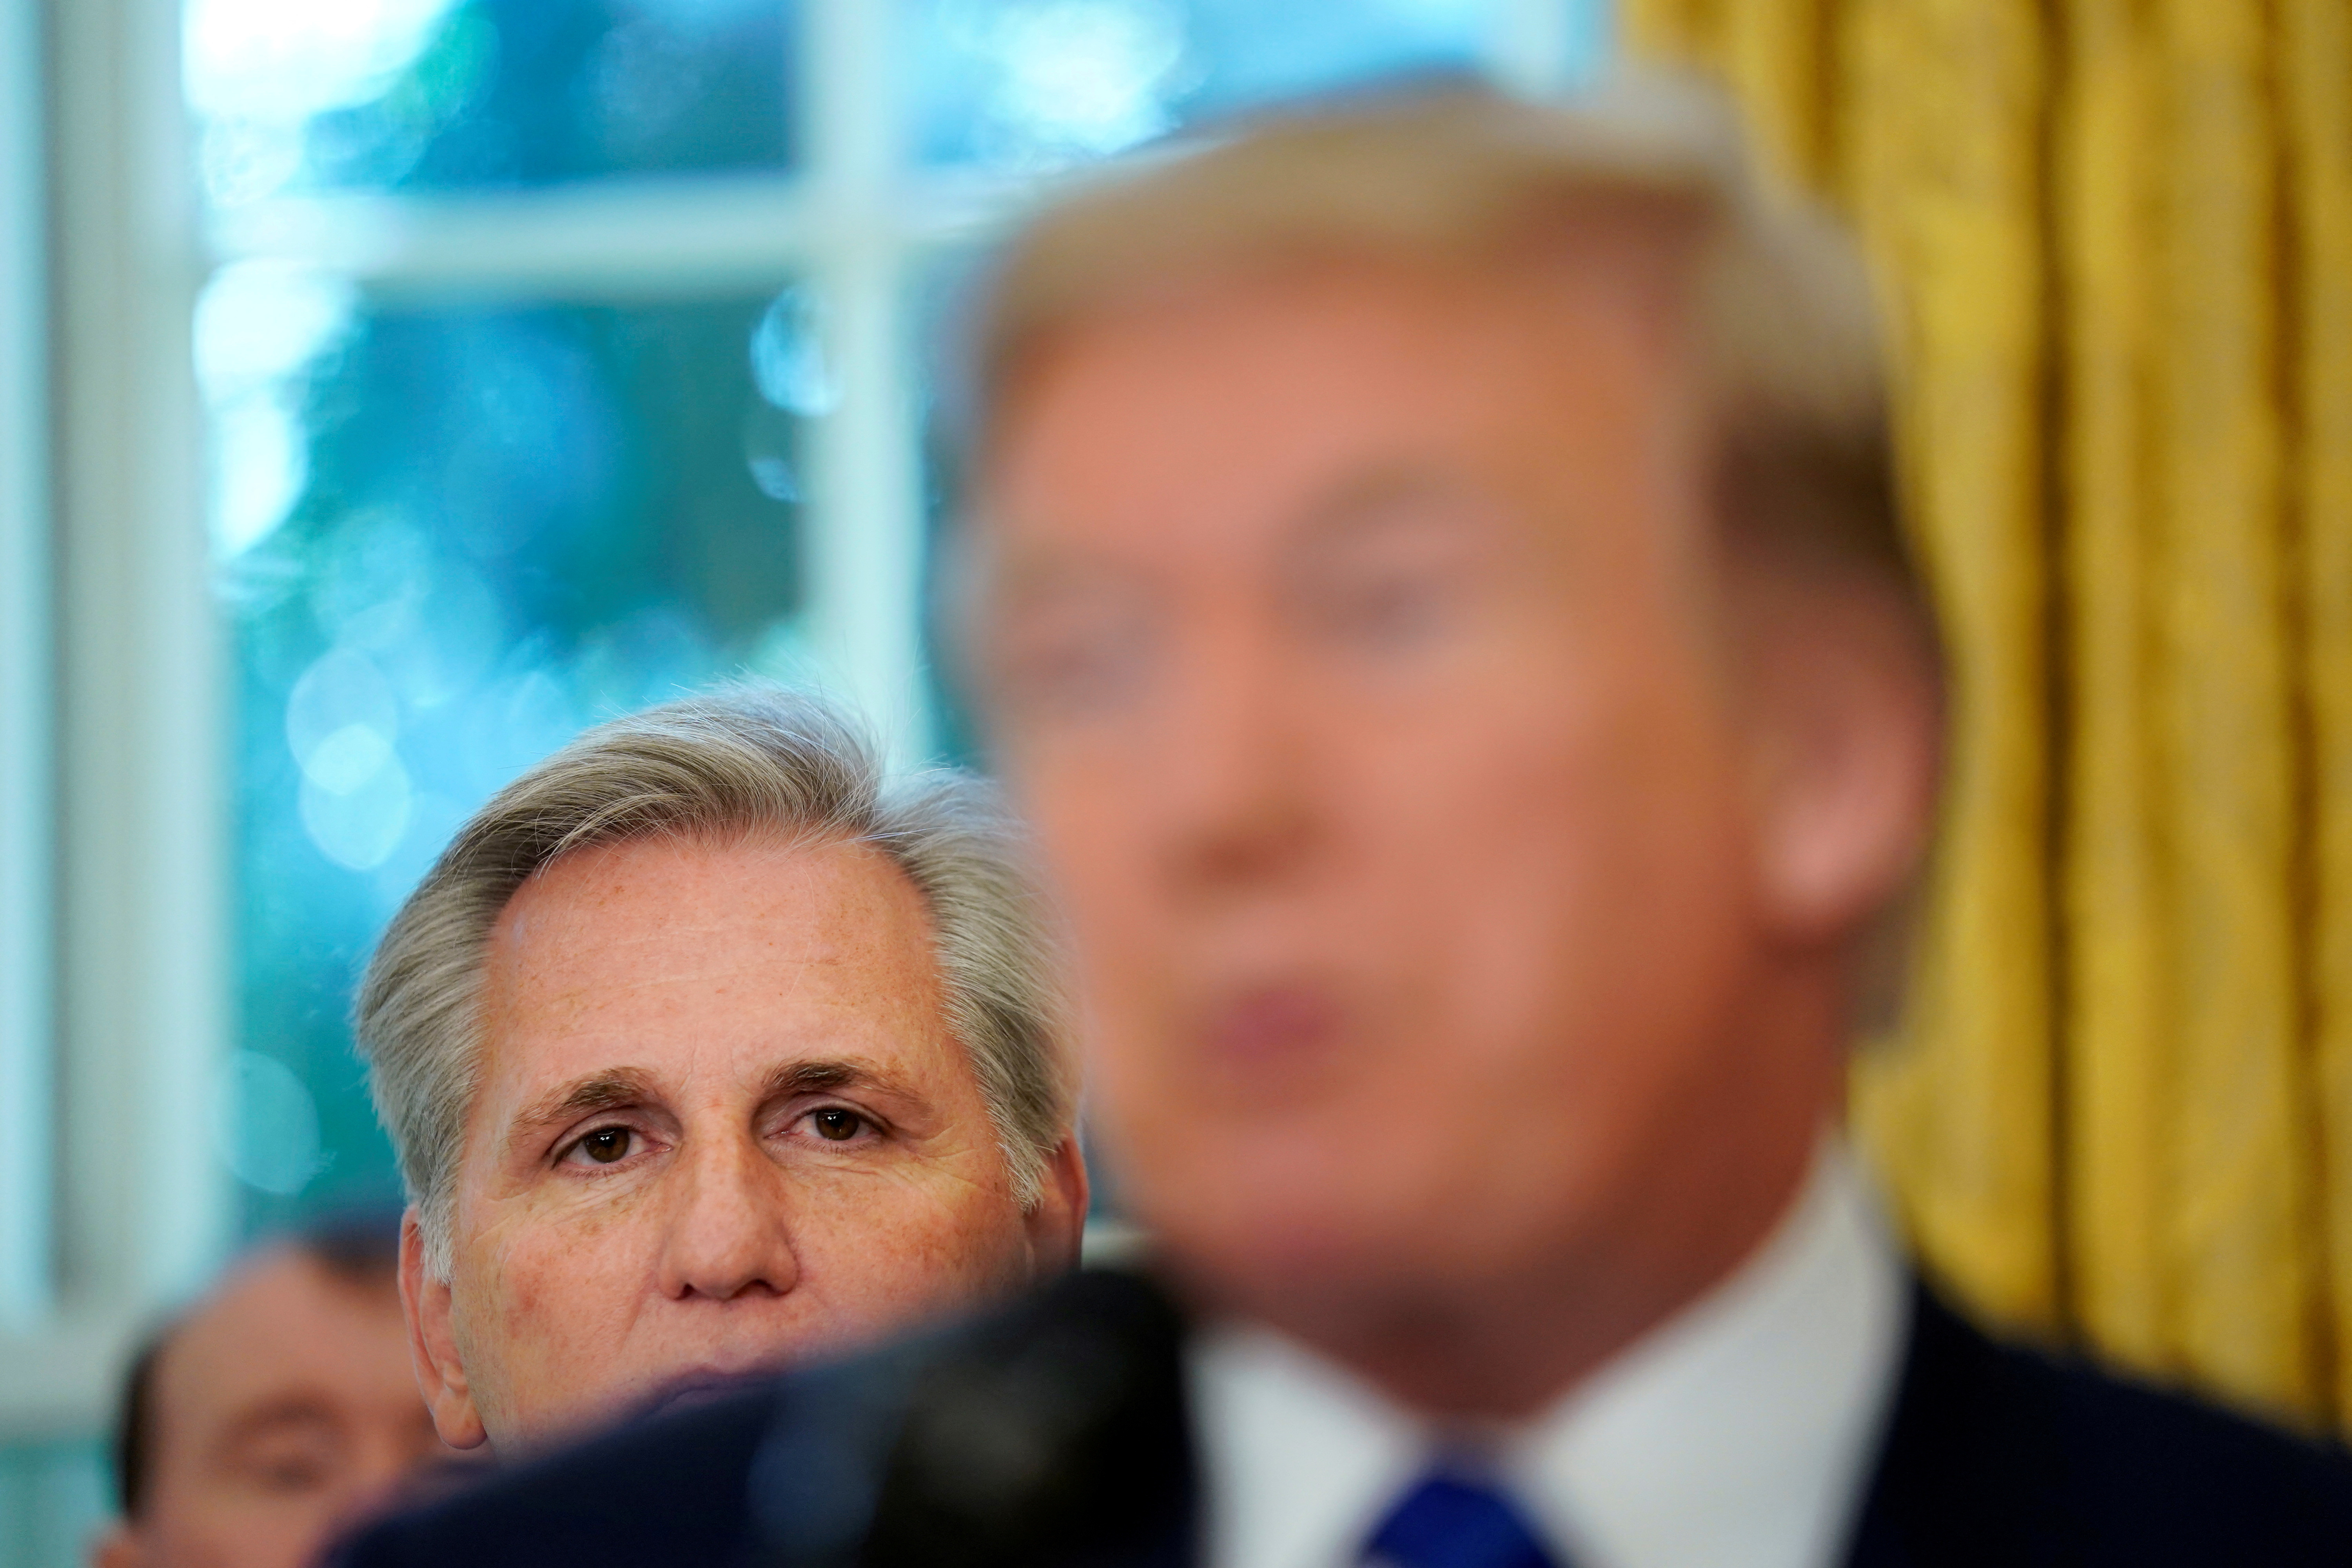 Kevin McCarthy looks at U.S. President Donald Trump as he delivers remarks in the Oval Office of the White House in Washington, U.S. November 2, 2017. /Reuters